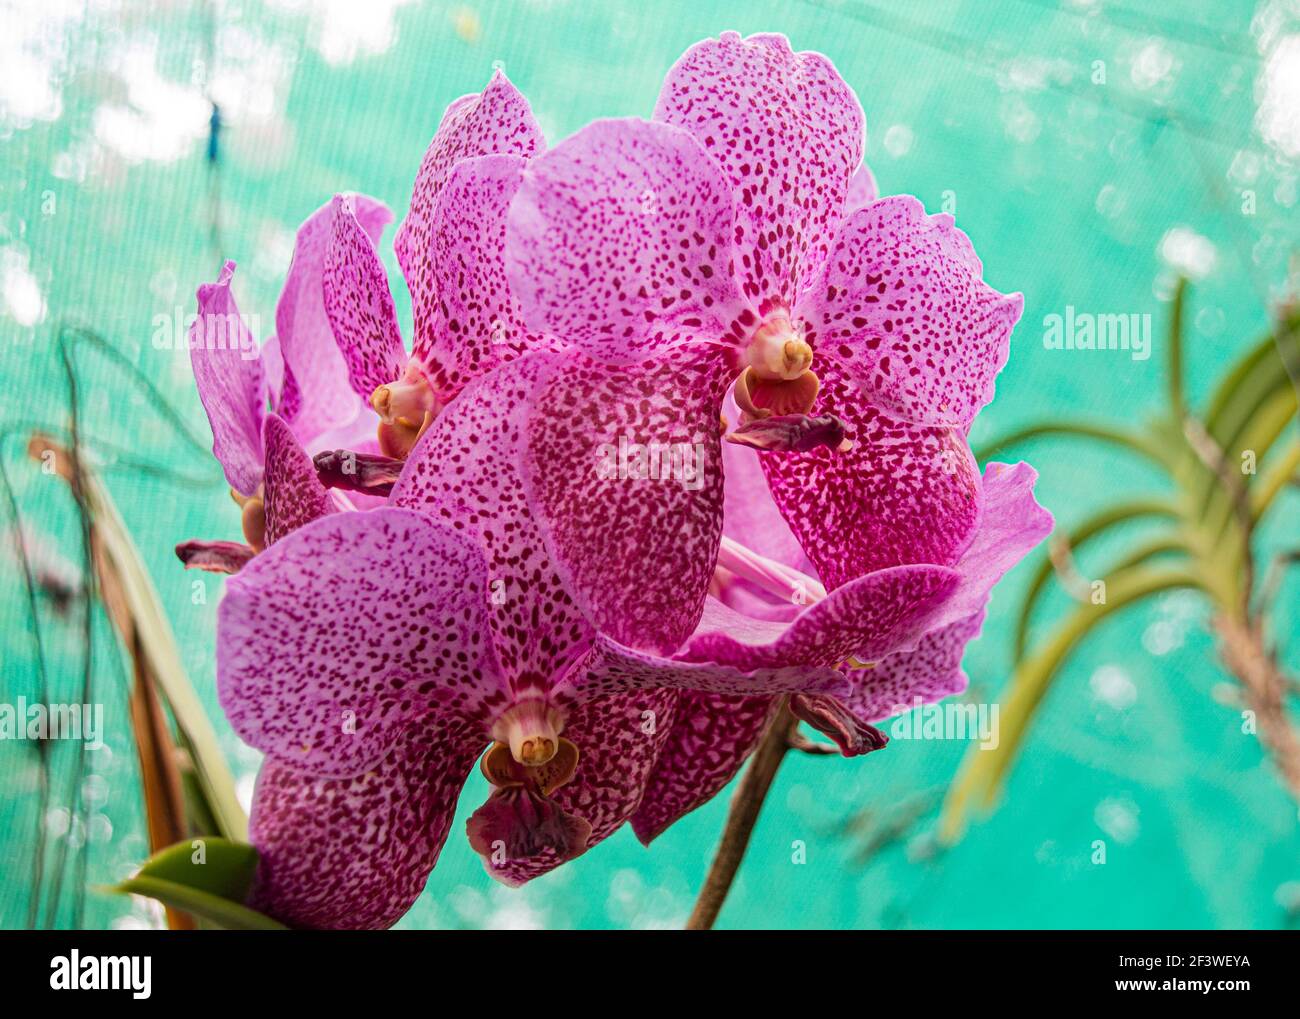 Speckled mauve flower of the vanda orchid Stock Photo